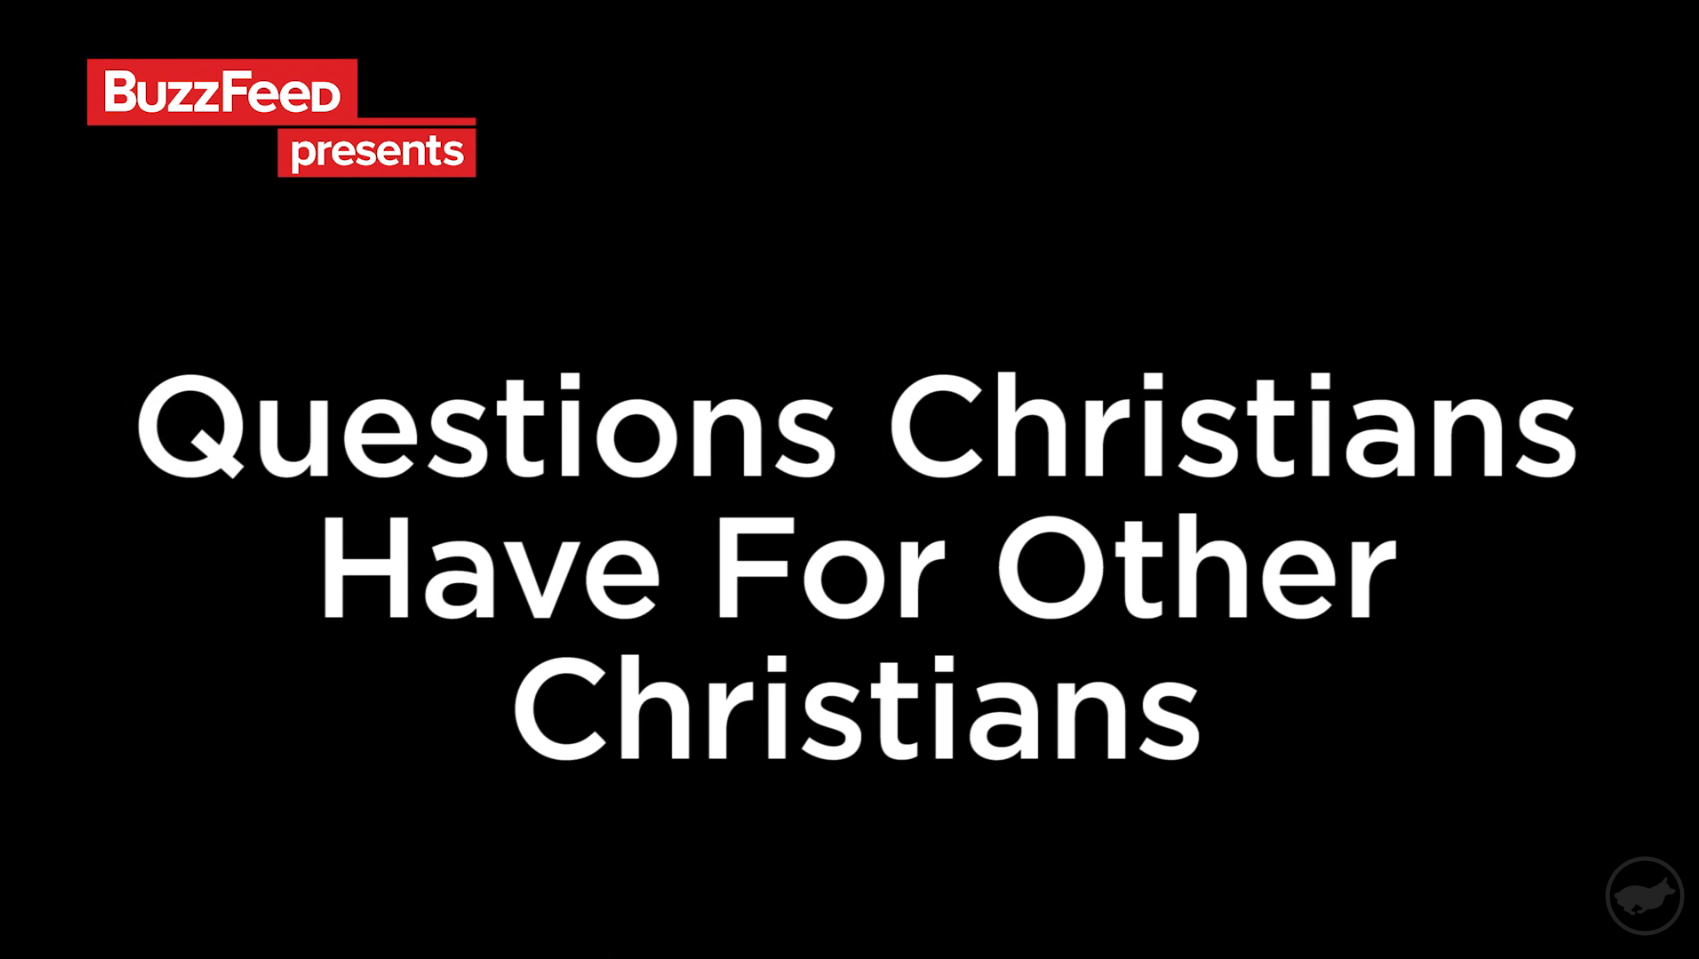 An 'Other' Christian Responds To BuzzFeed's 'Questions Christians Have ...